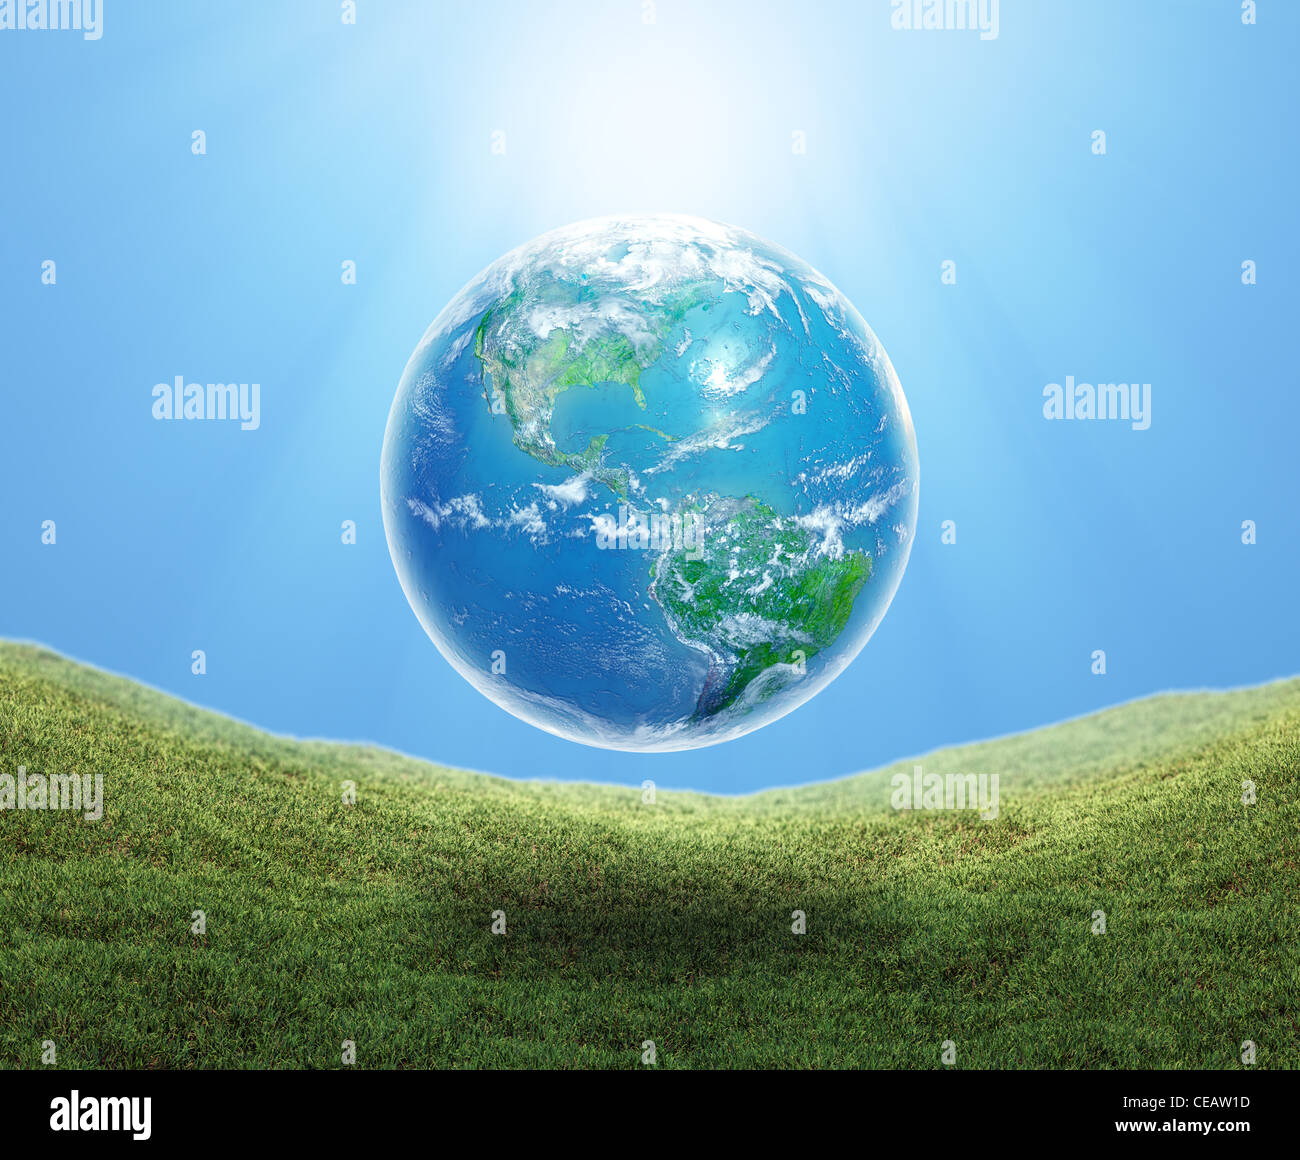 Earth floating over a grass field Stock Photo